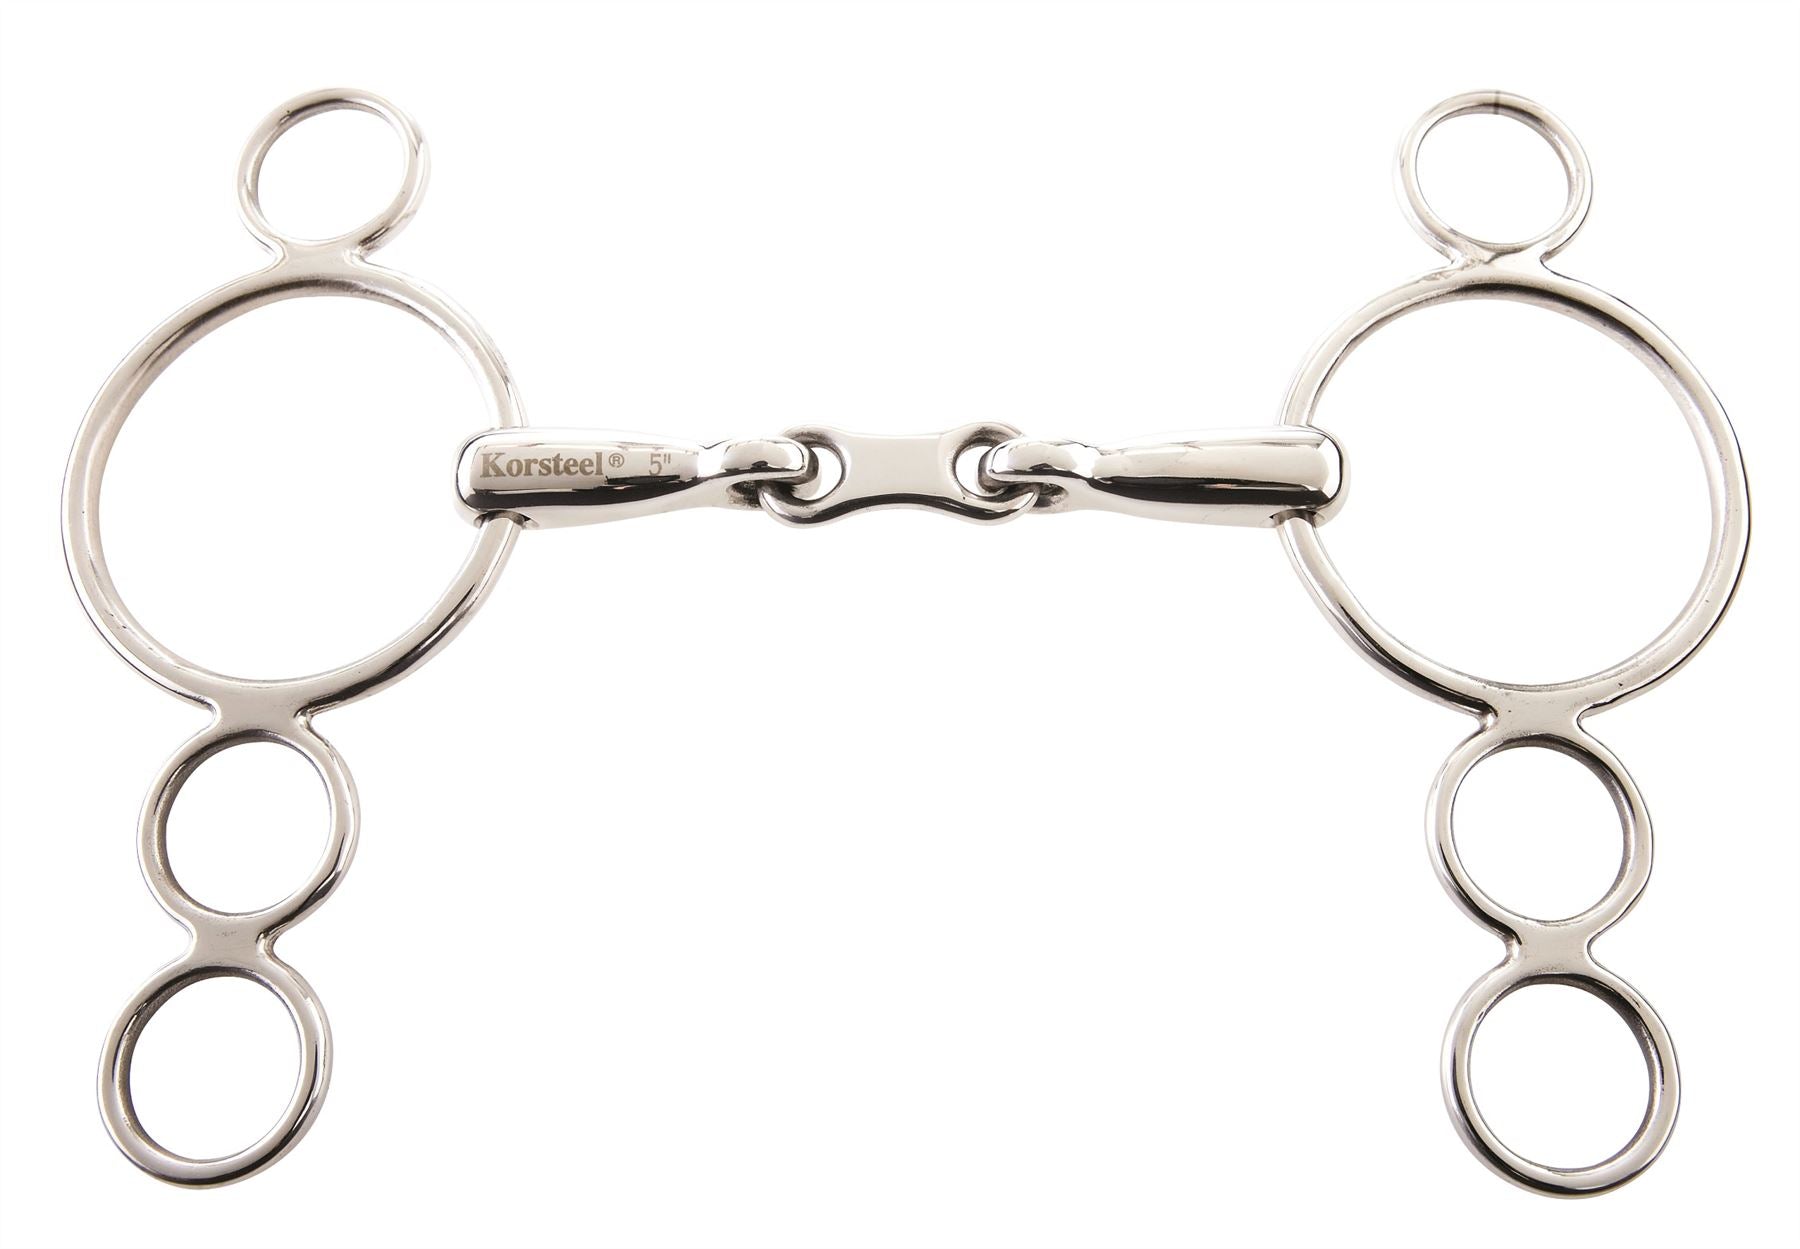 Korsteel Dutch Gag French Link 3 Ring - Just Horse Riders